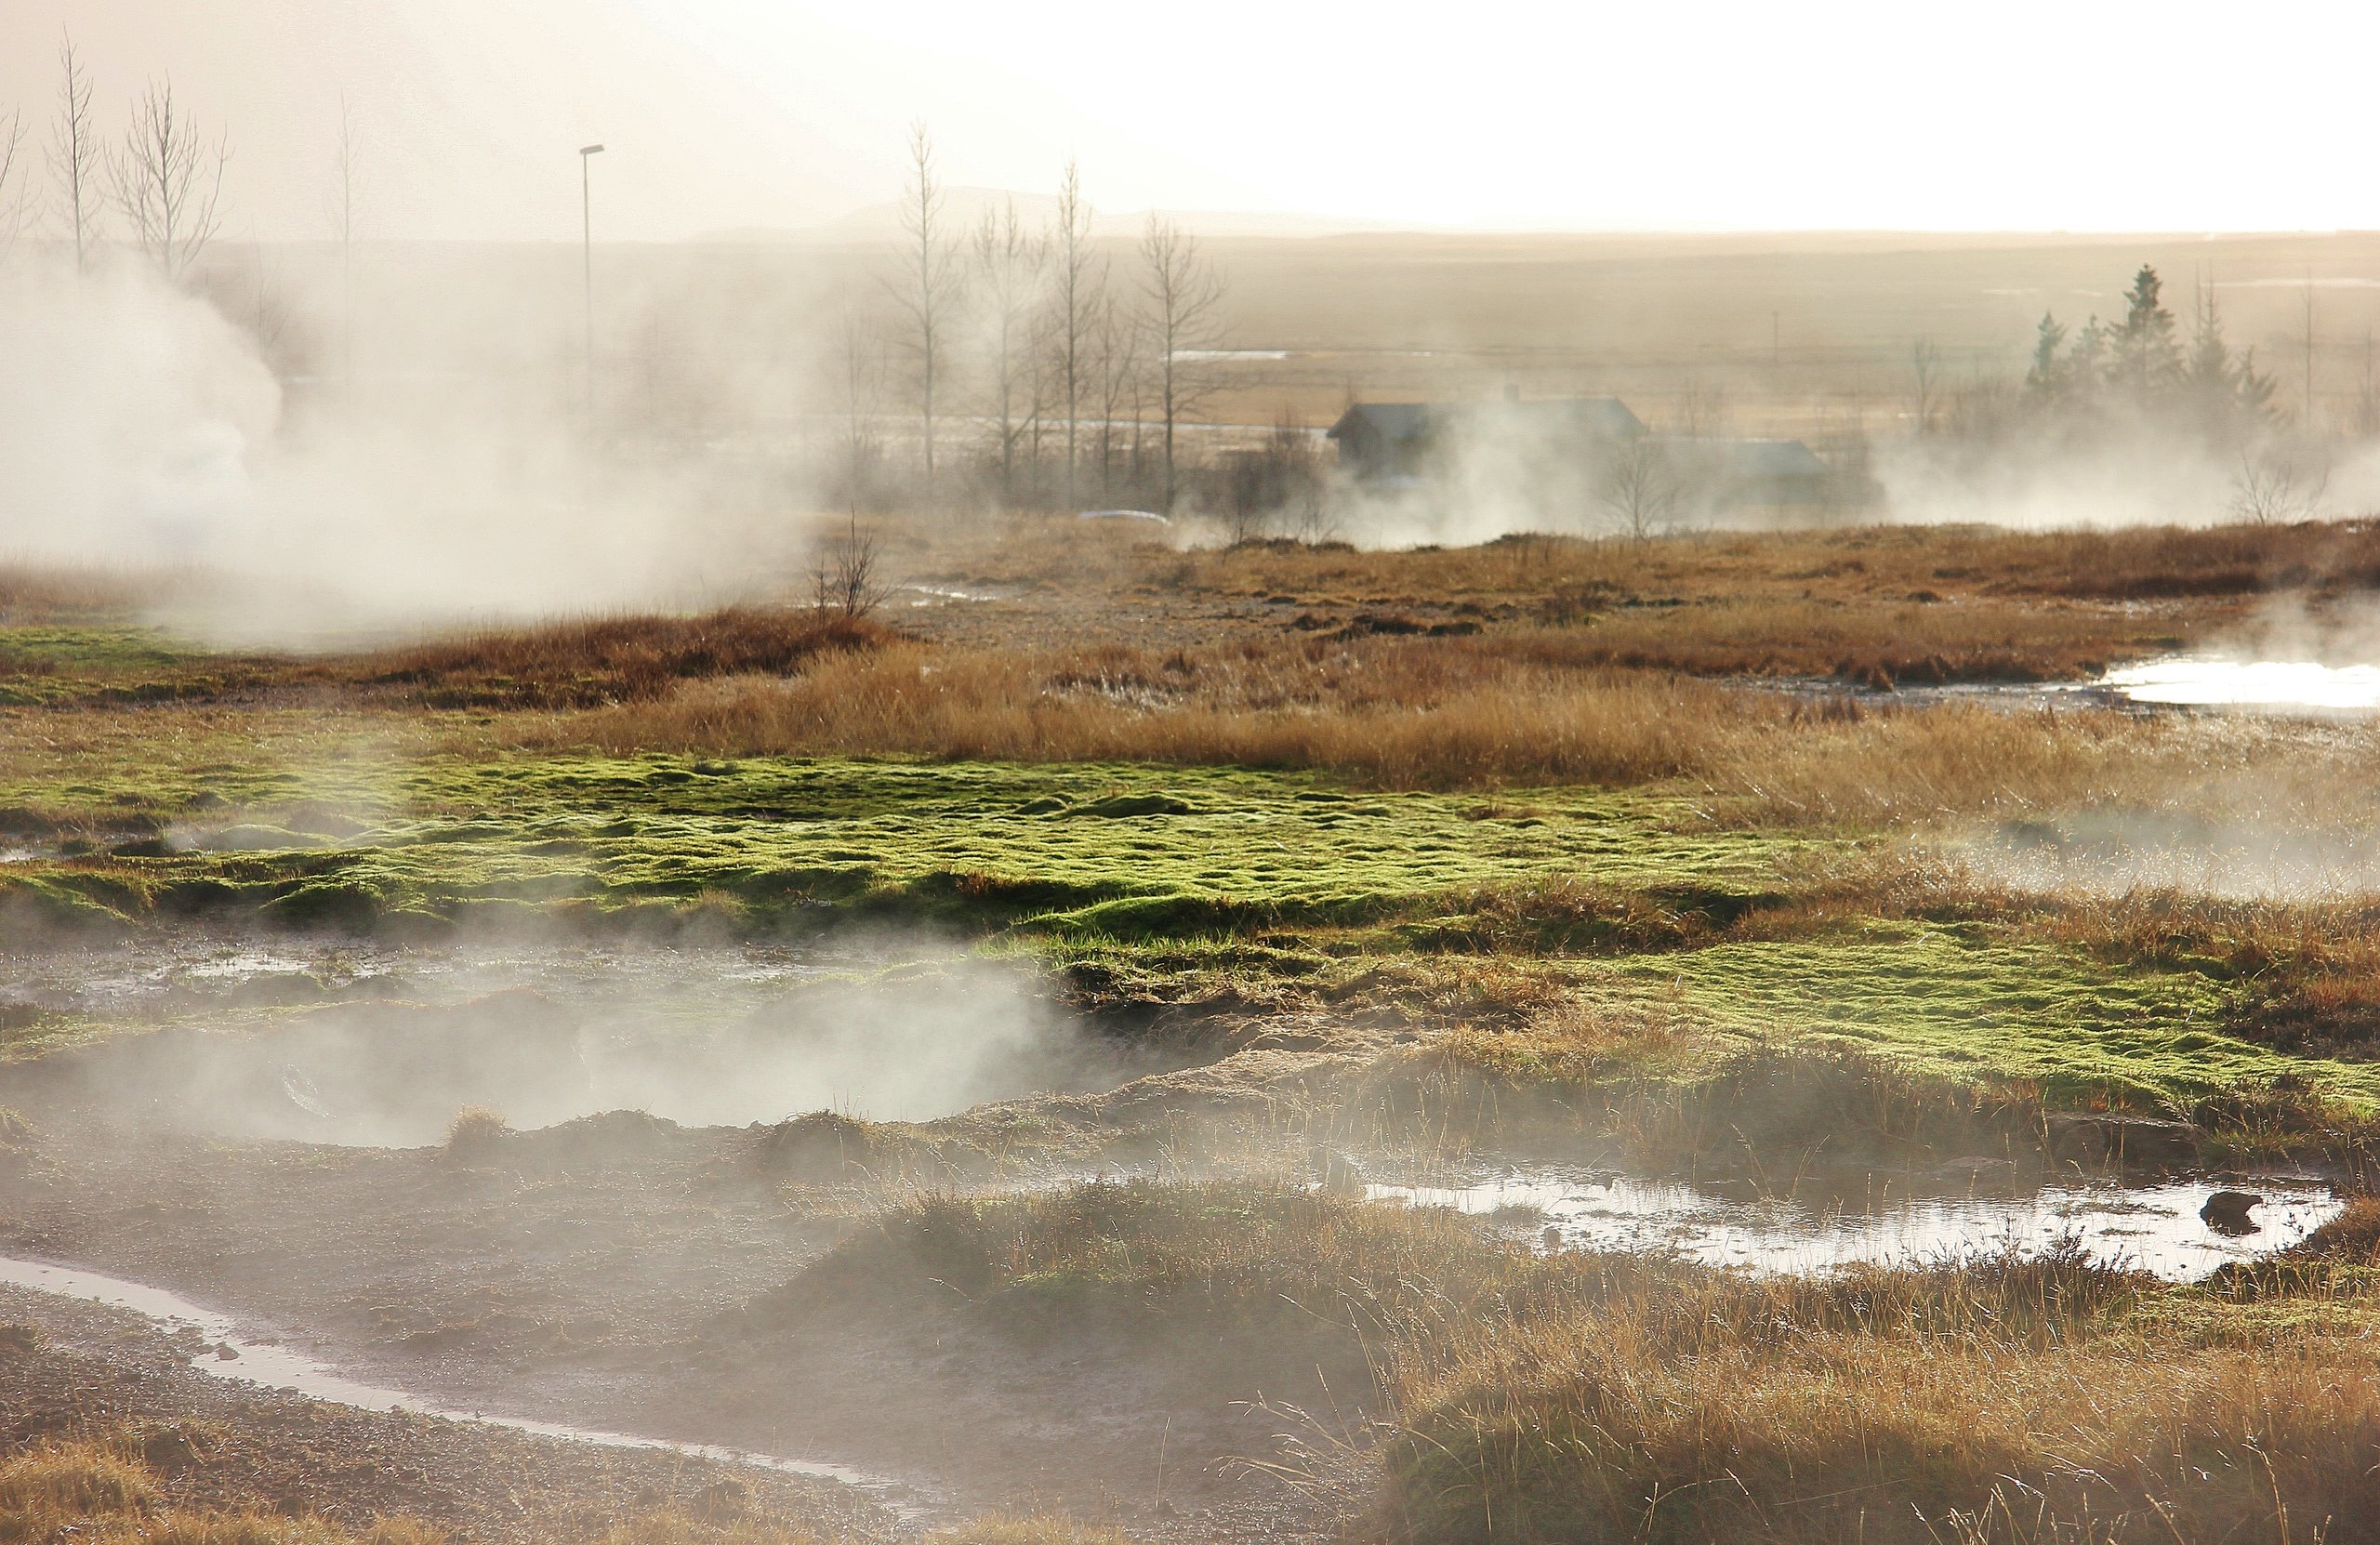 Geyser Area - Golden Circle Tour in Iceland